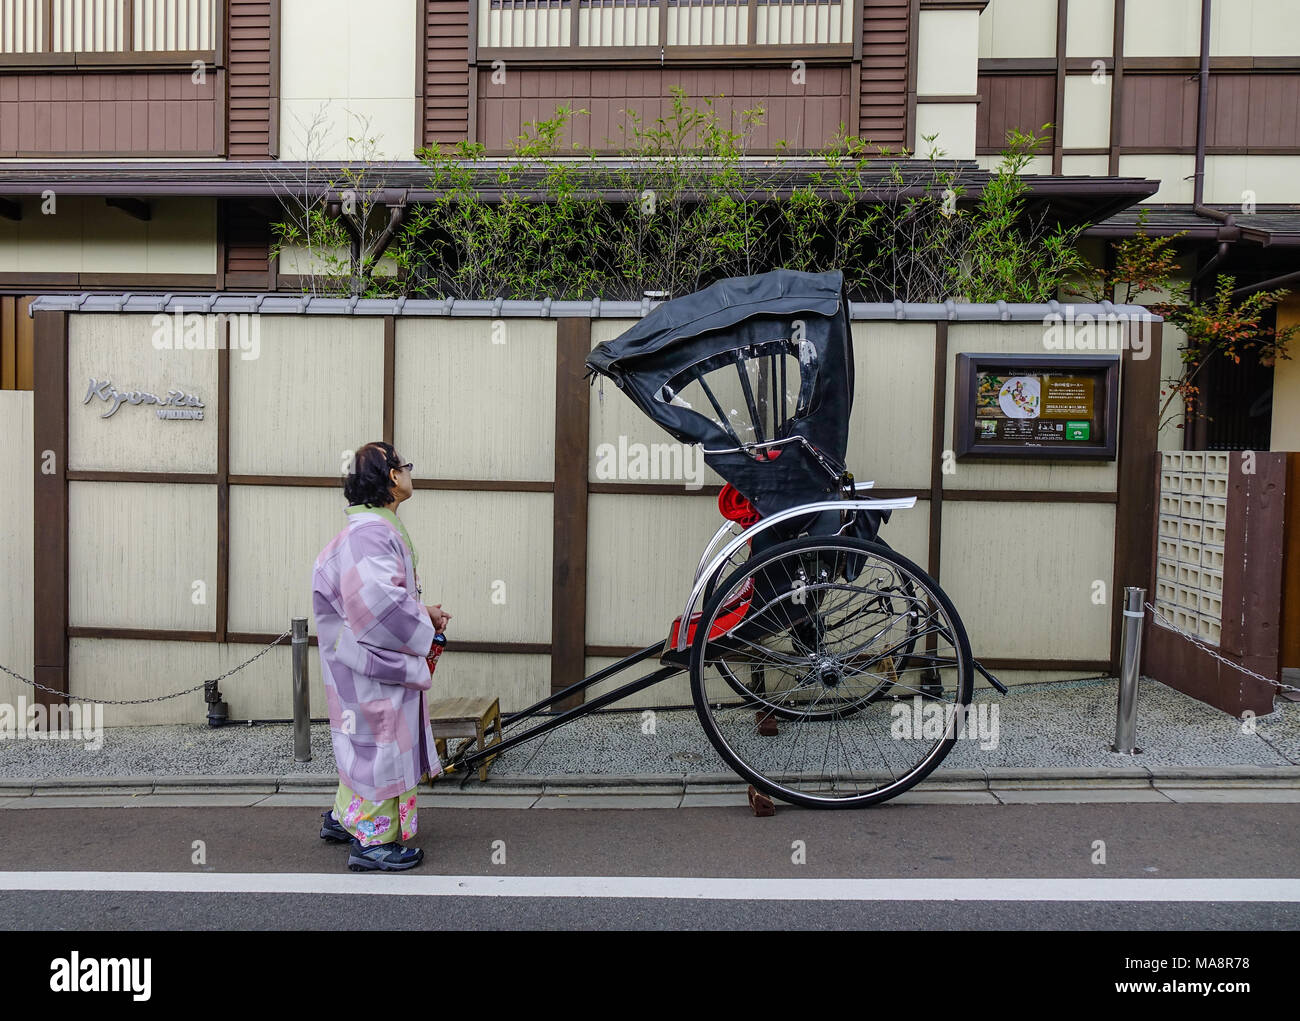 Kyoto, Japan - Nov 29, 2016. A woman with rickshaw on street at old town in Kyoto Japan. Kyoto was the capital of Japan for over a millennium. Stock Photo